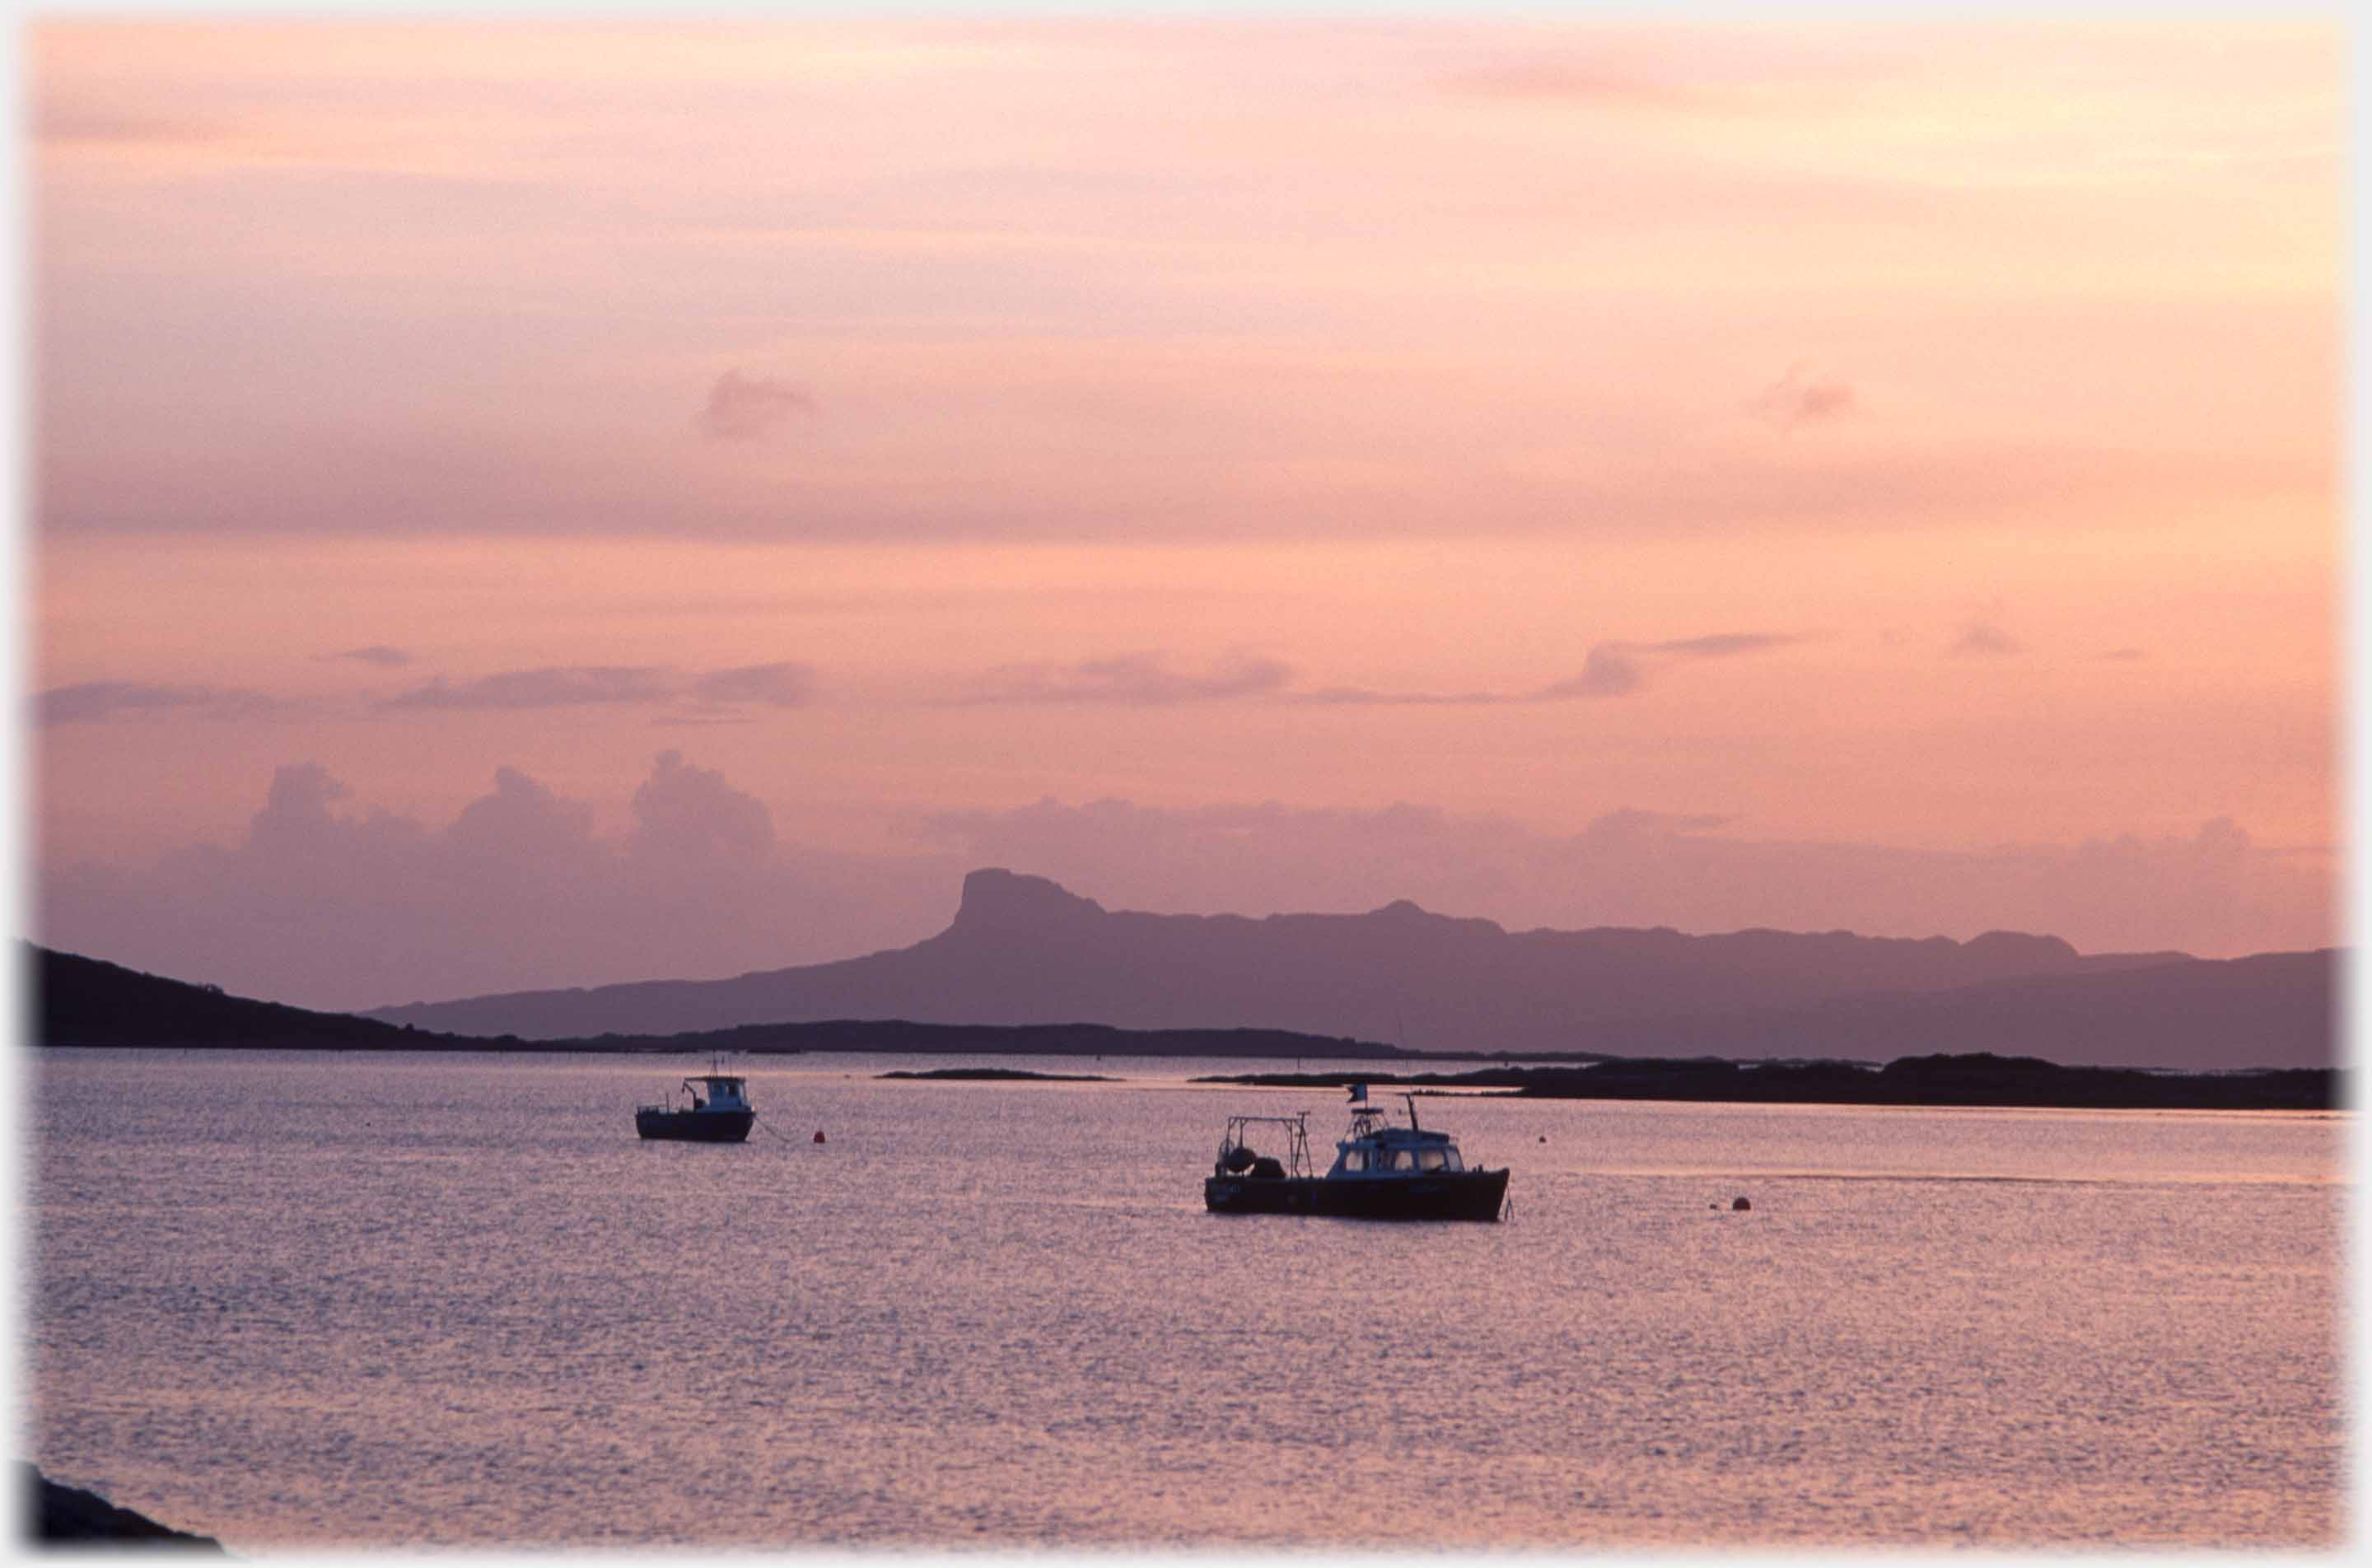 Fishing boat on pink sea with the unique profile of Eigg beyond.